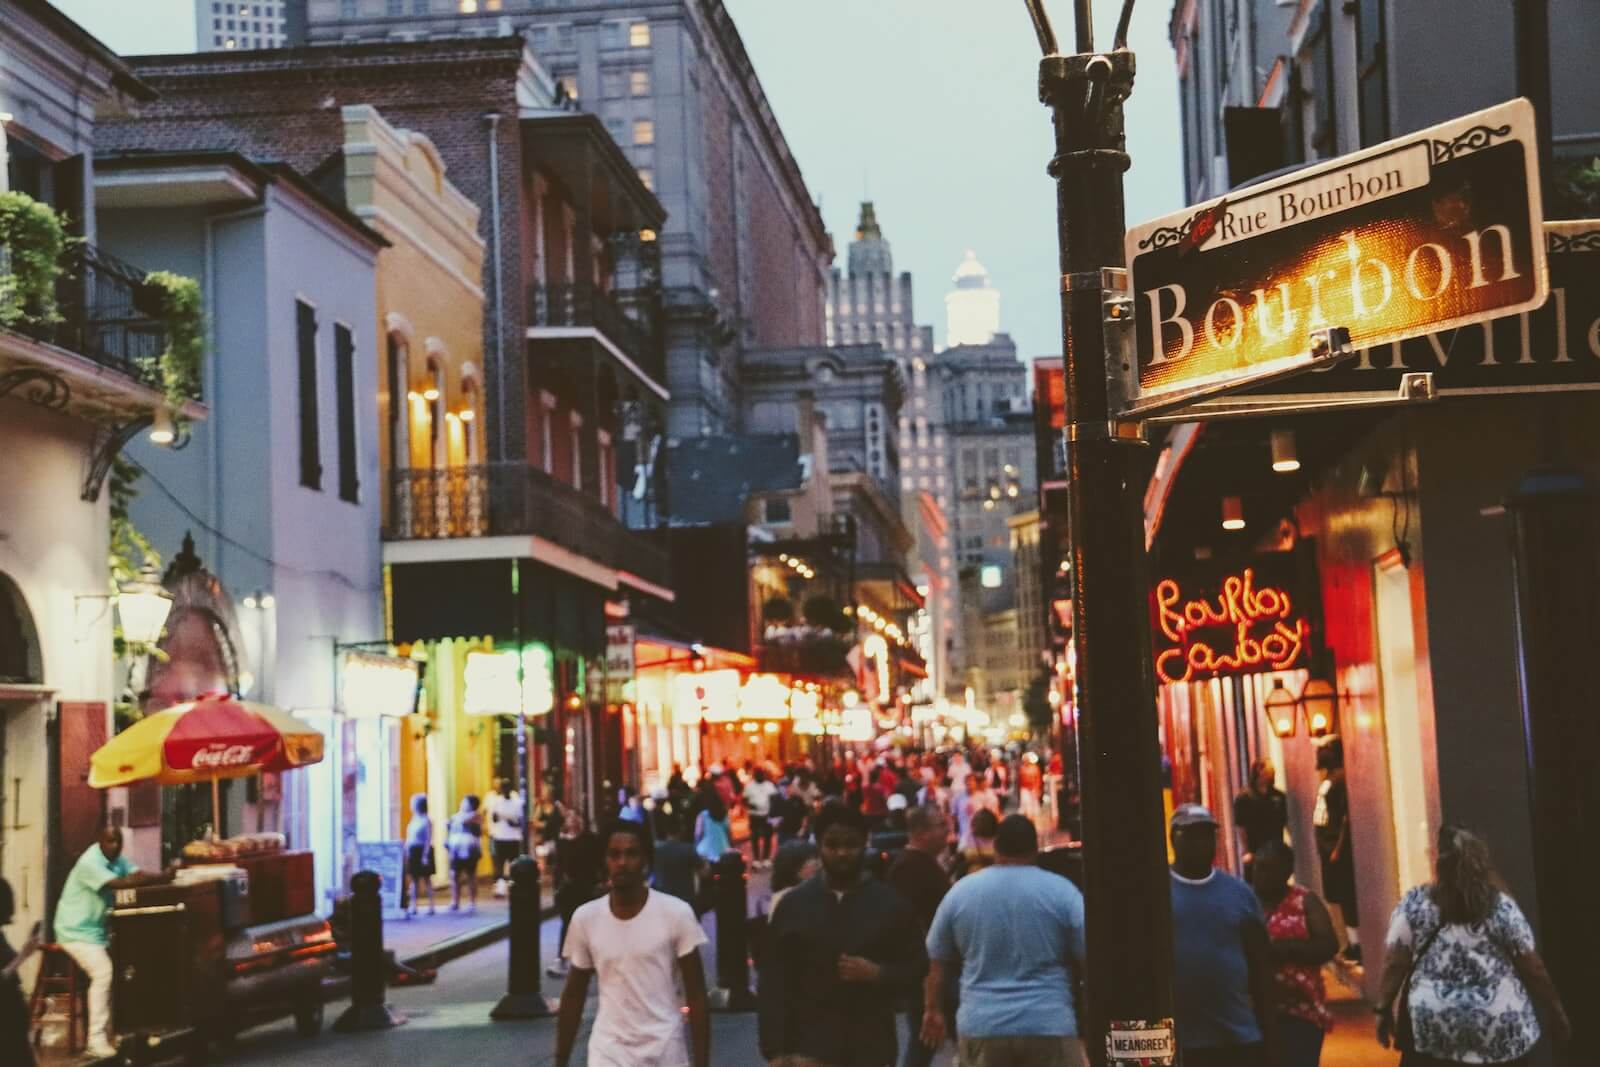 Busy Bourbon Street in New Orleans